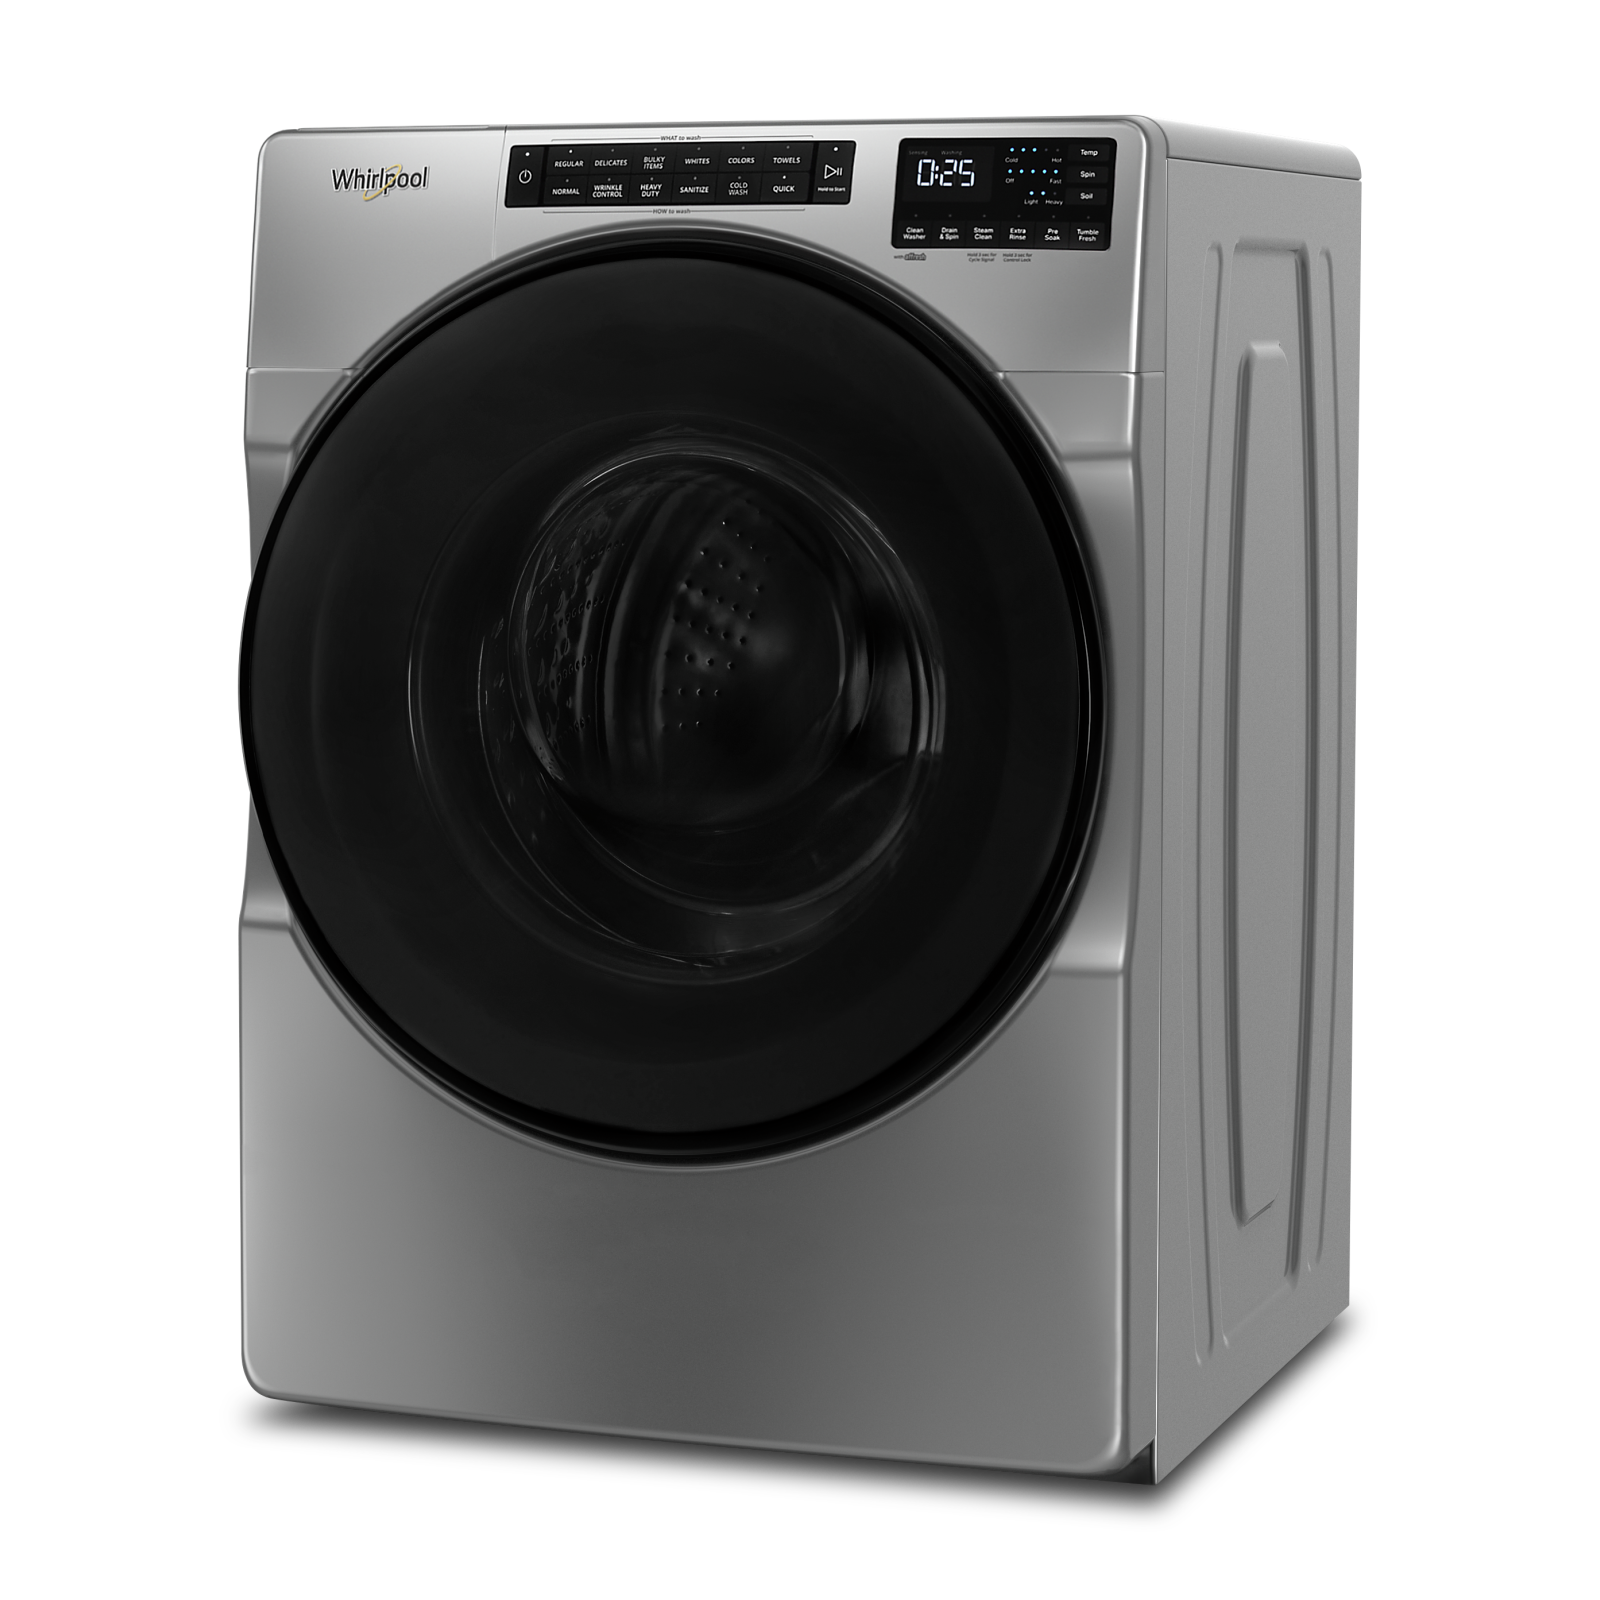 Whirlpool - 5.8 cu. Ft  Front Load Washer in Grey - WFW6605MC